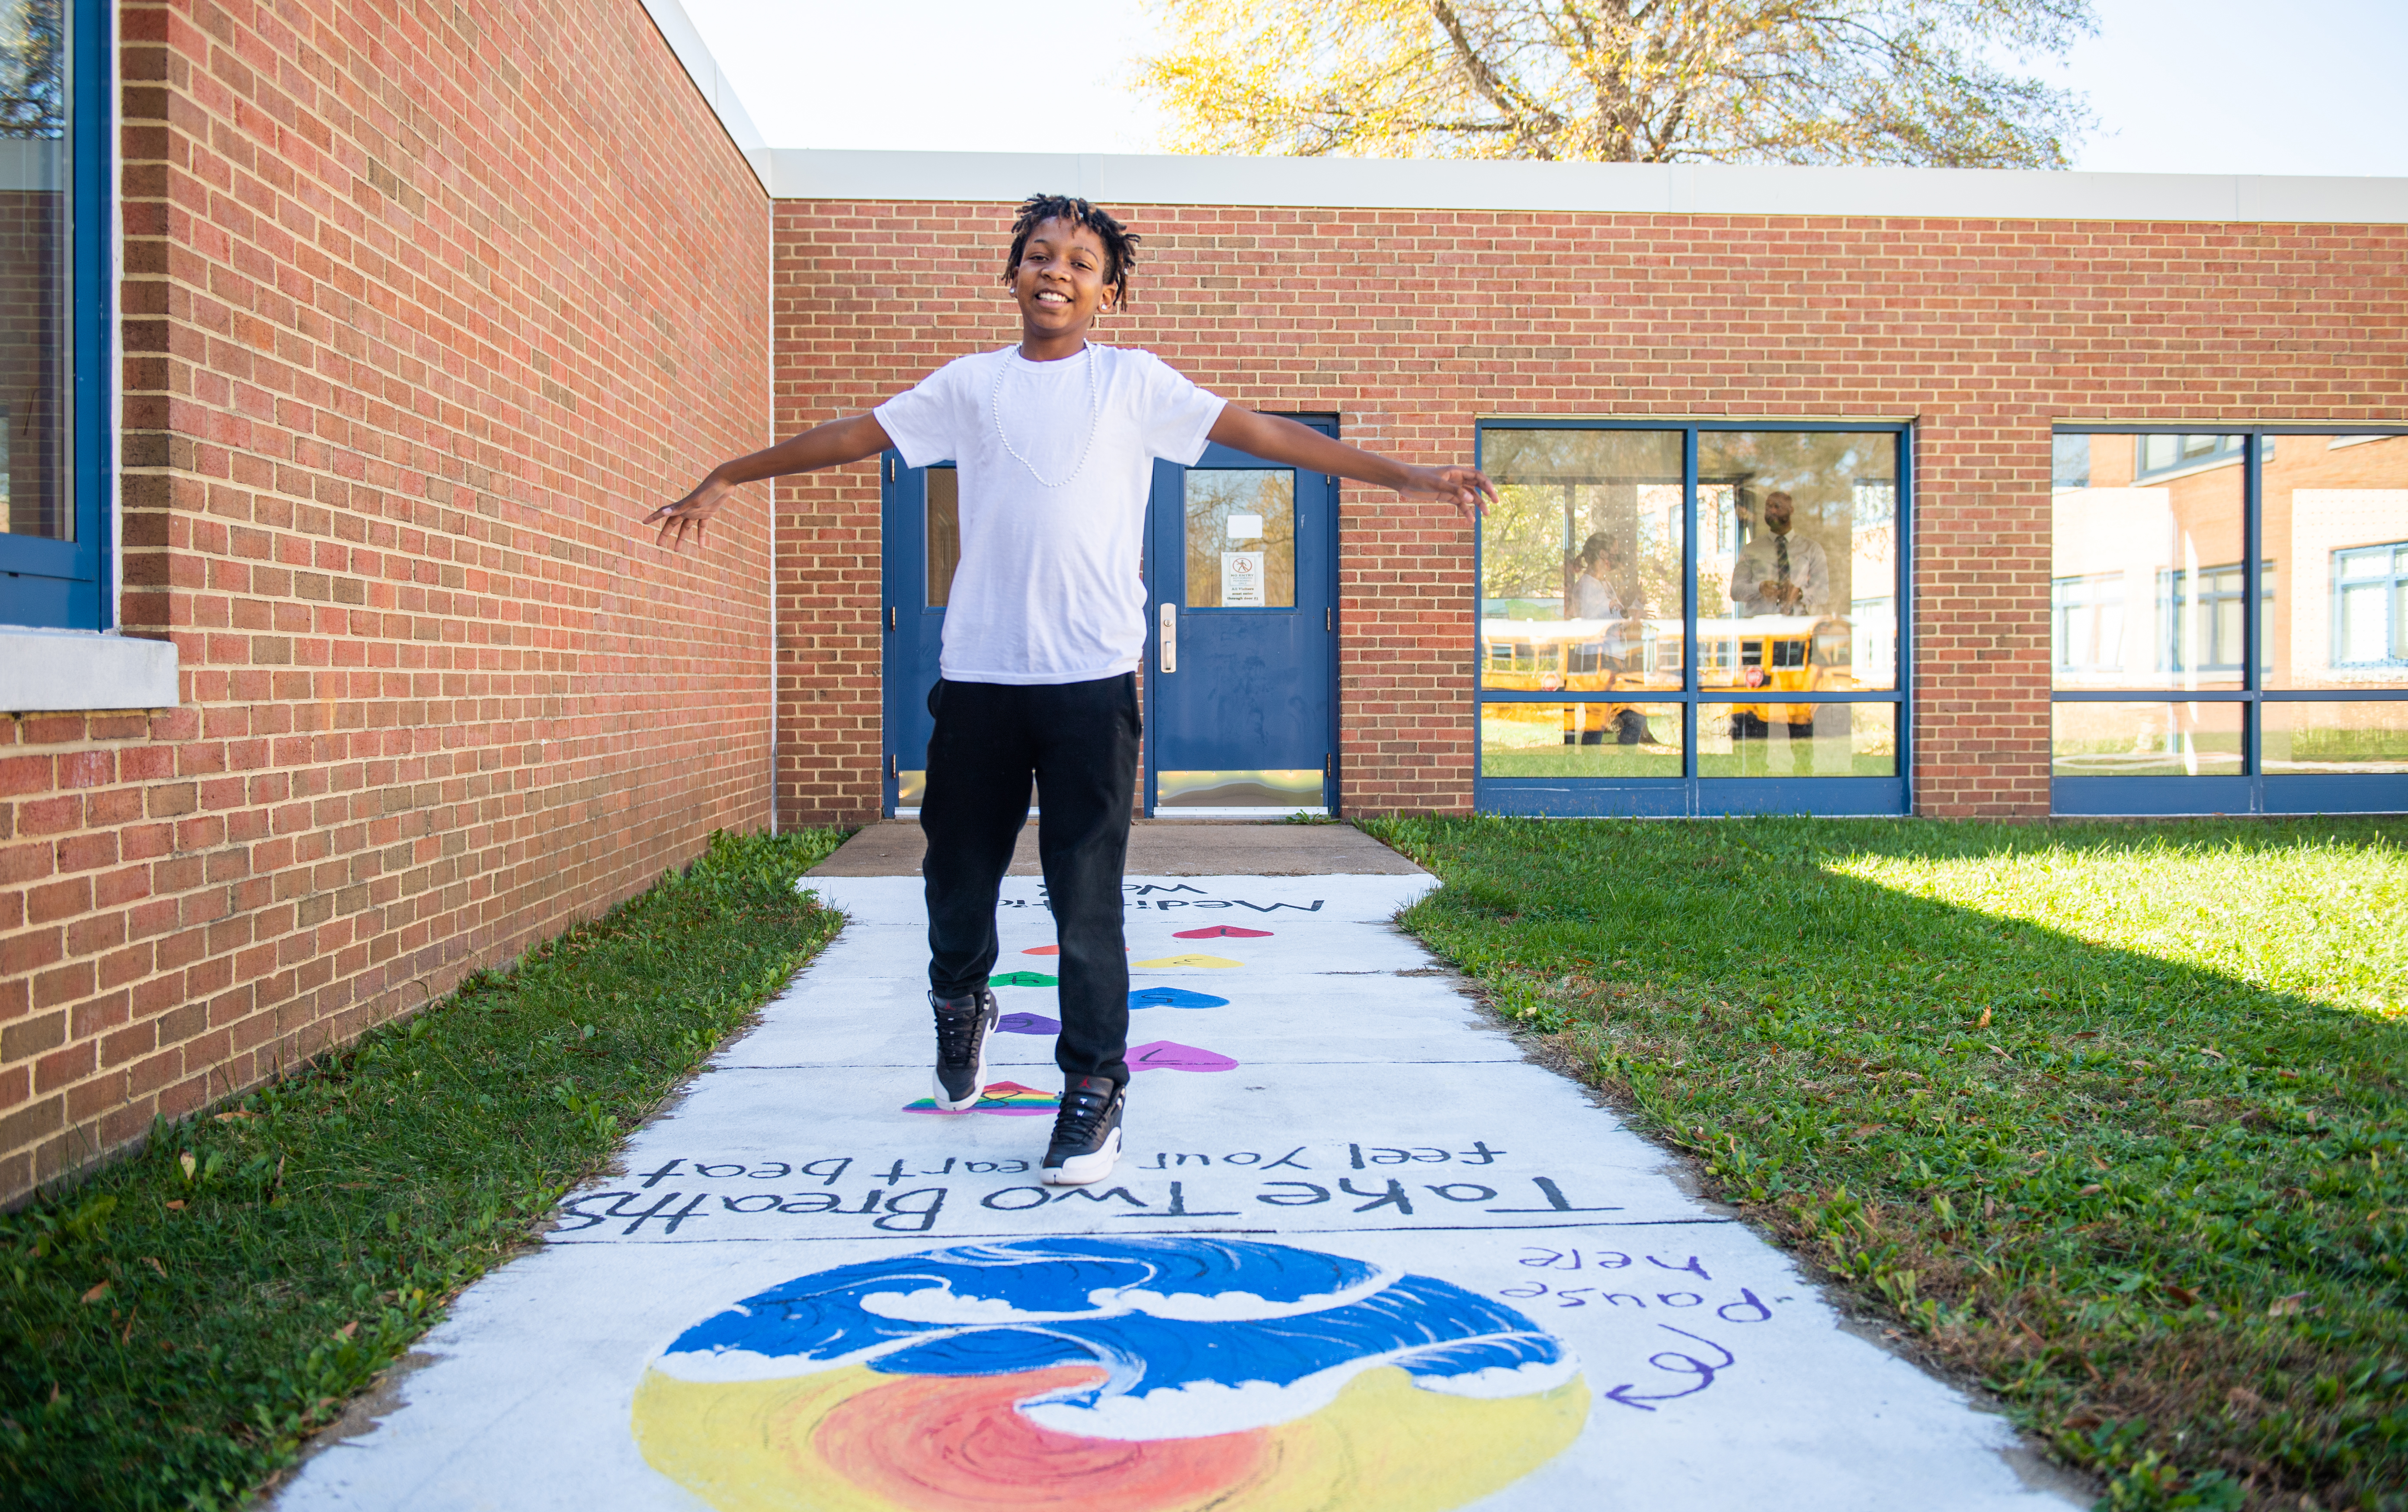 A student from Walt Whitman Middle School plays on a chalked path